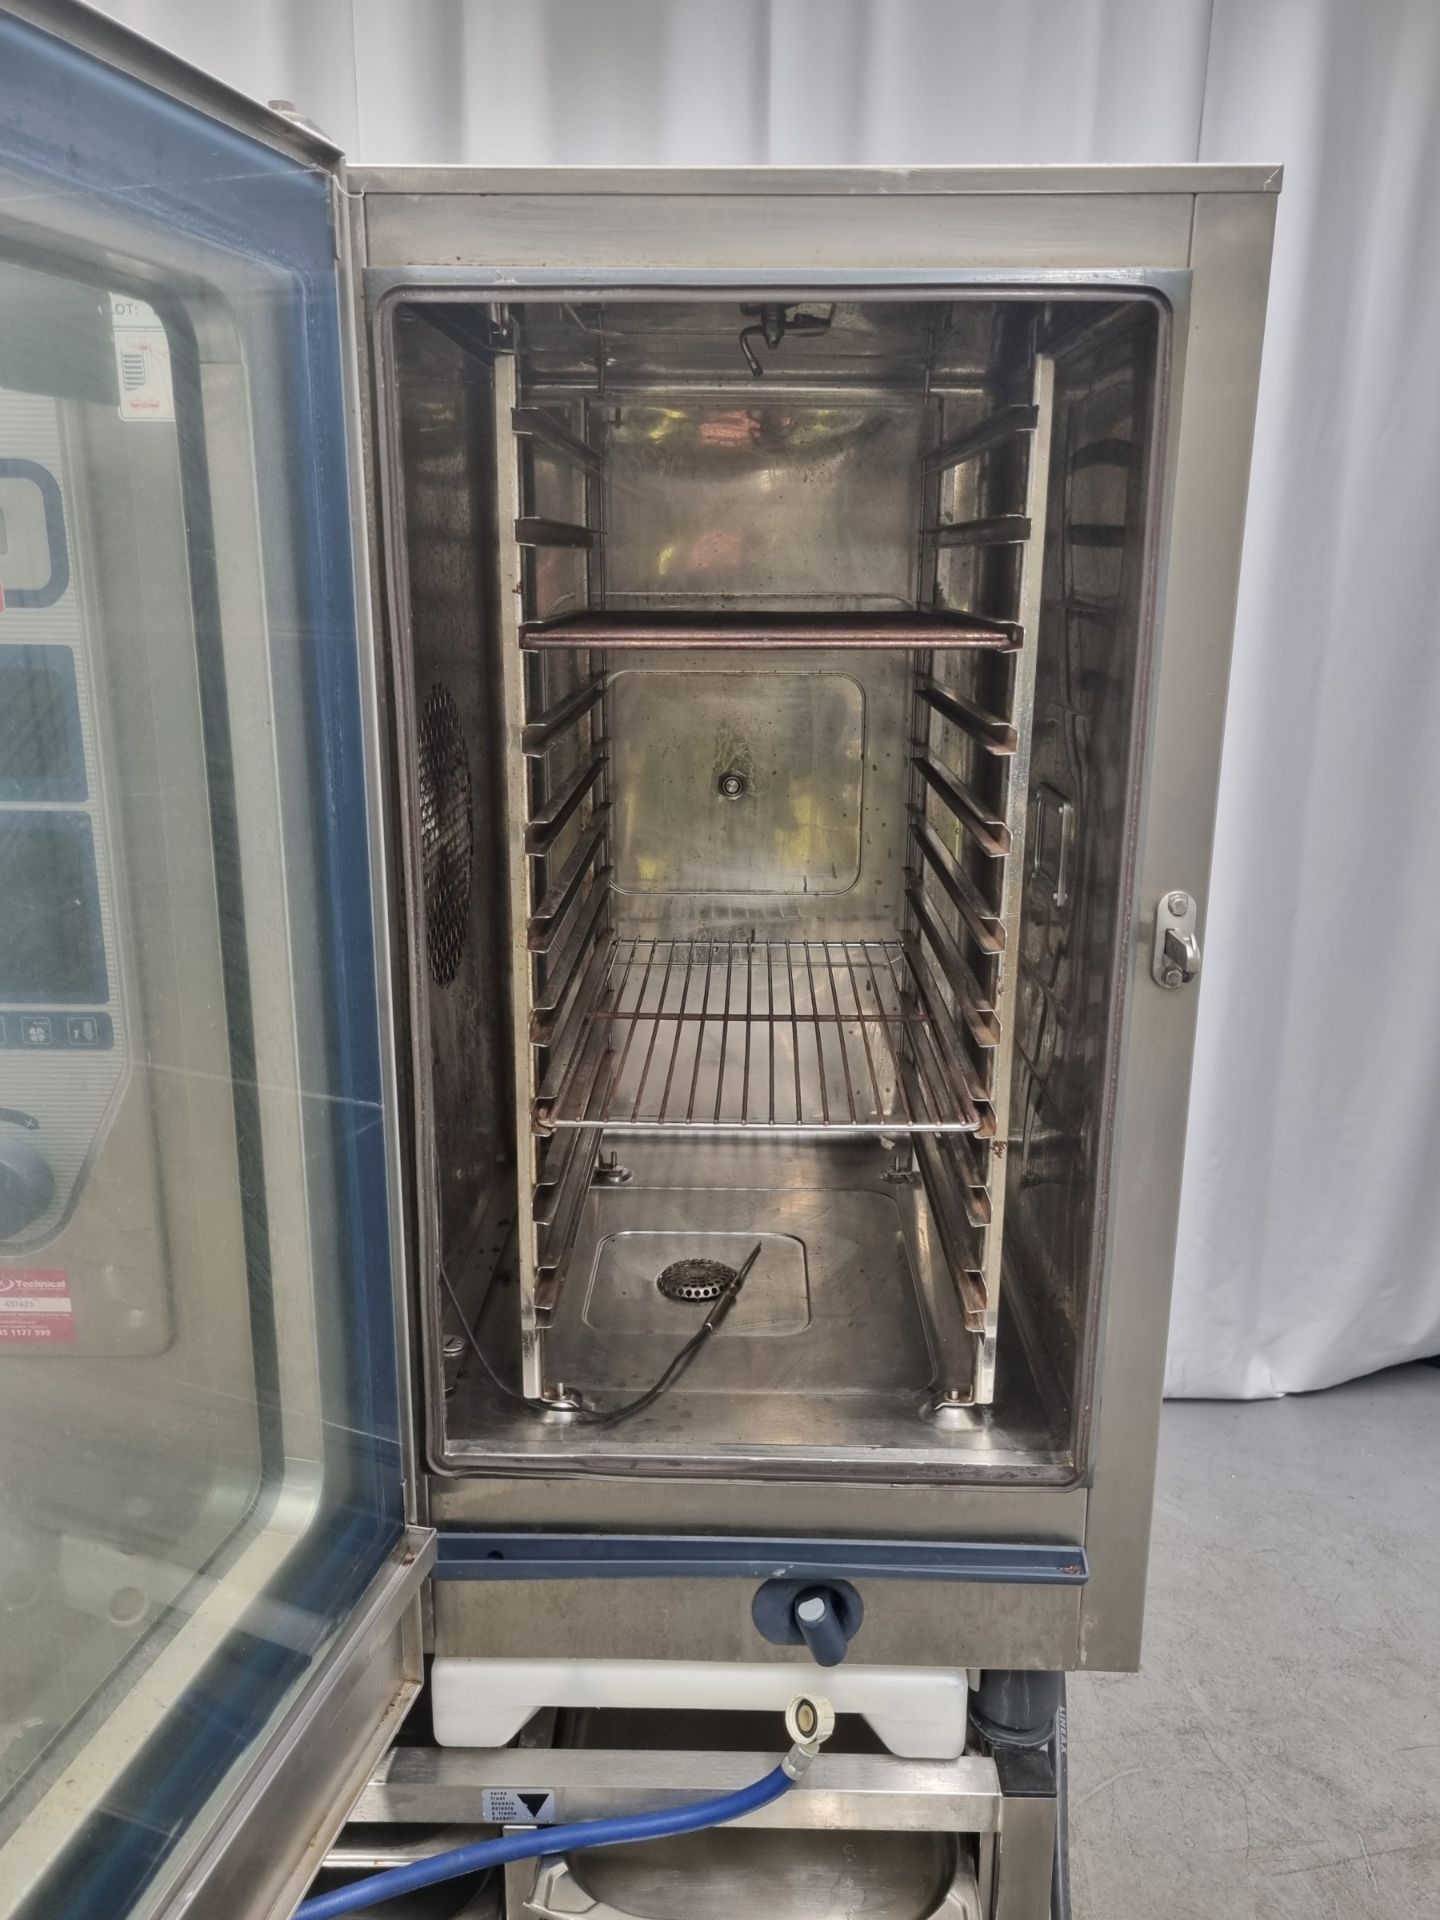 Rational cpc 101 climaPlus Combi oven with underneath racking and trays - Image 5 of 7